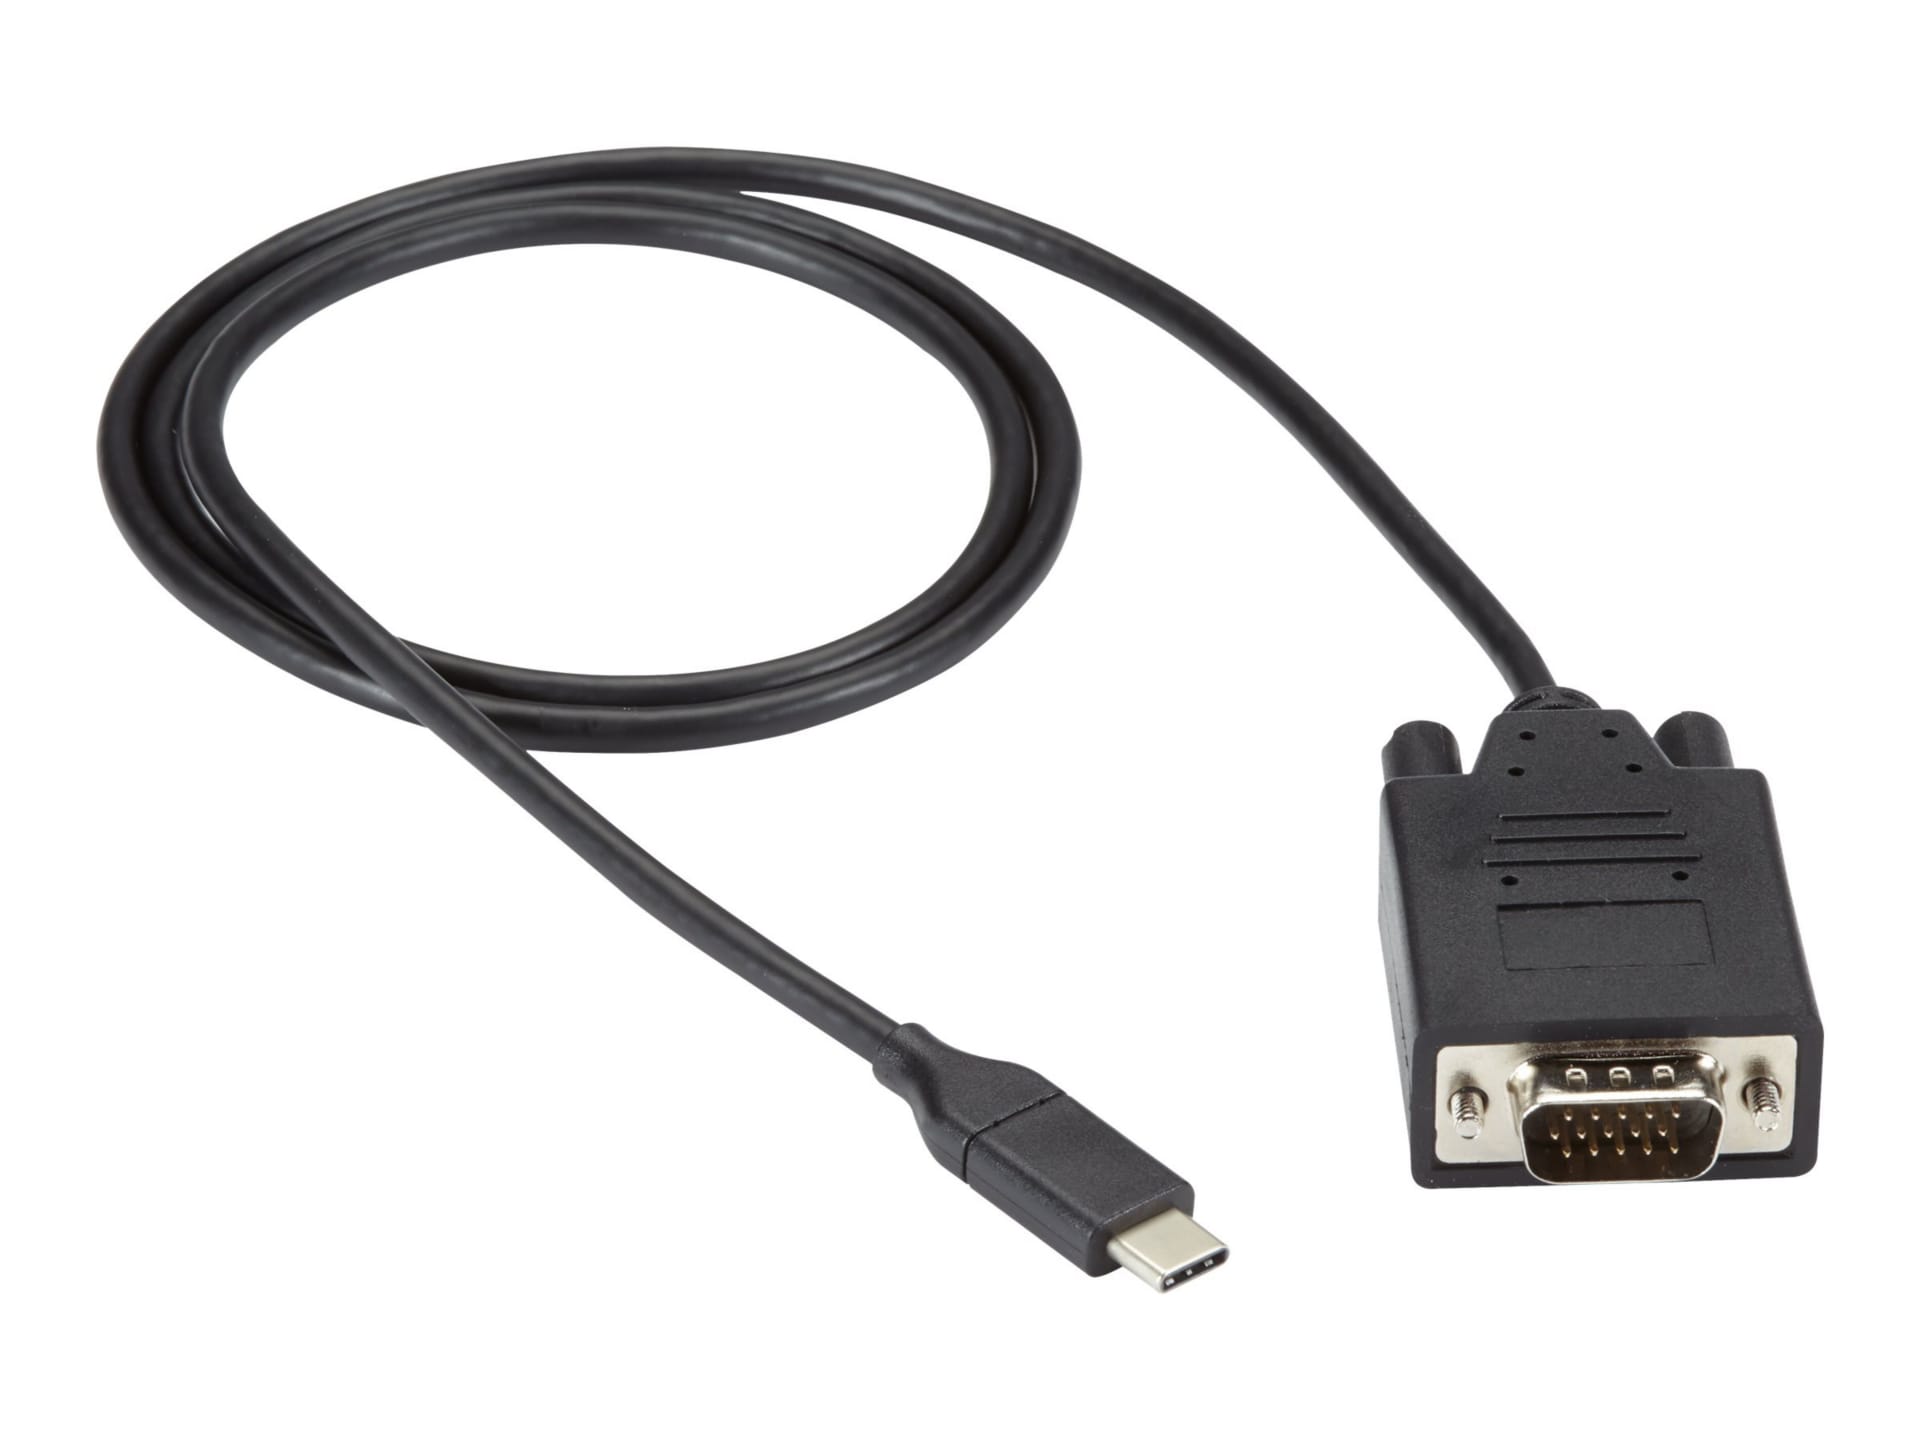 Black Box - video adapter cable - USB-C to HD-15 (VGA) - 3 ft